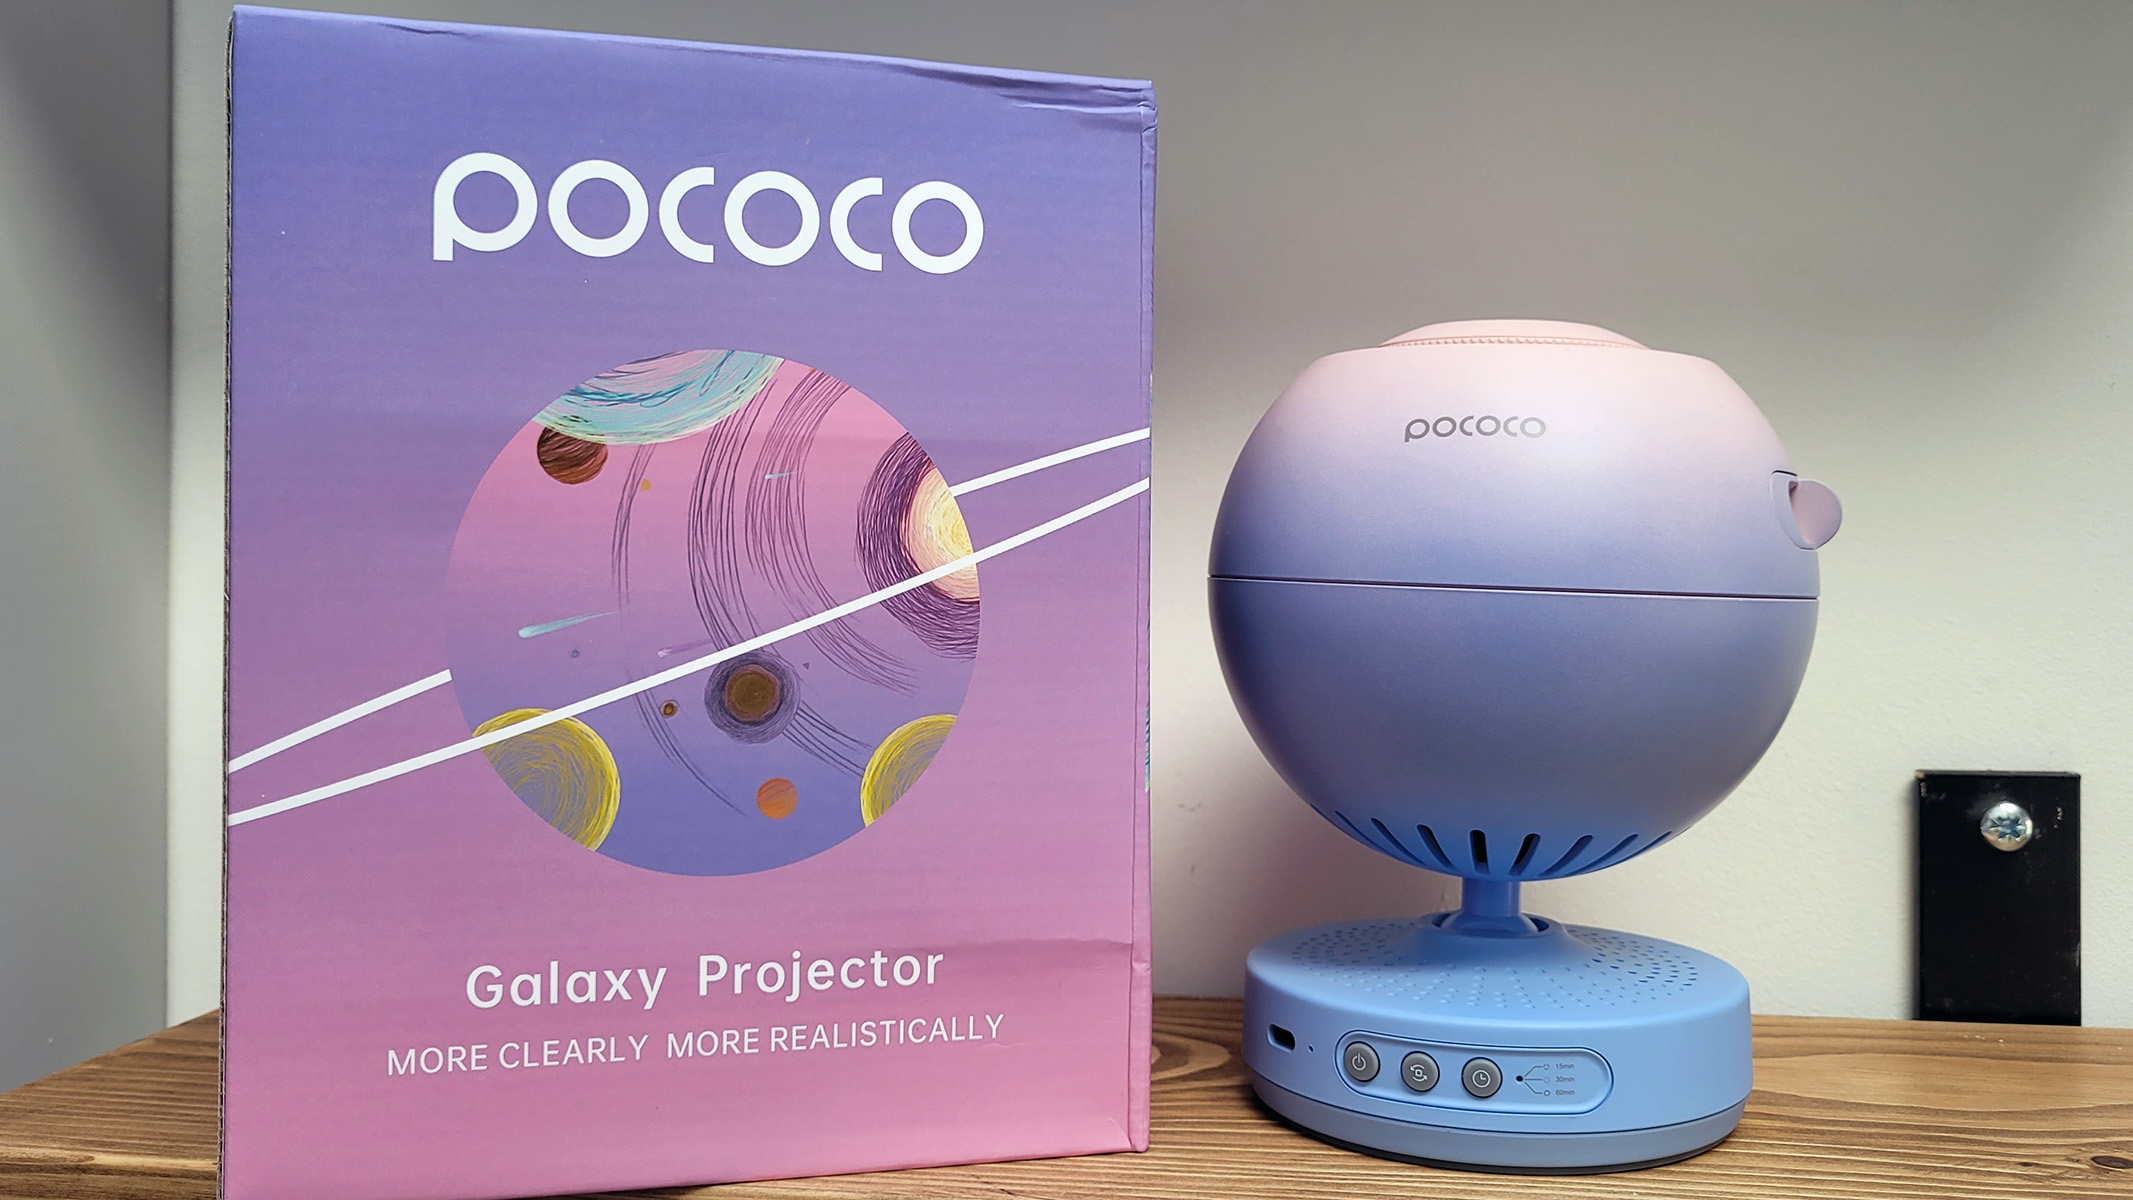 Save $50 on one of our favorite star projectors from Pococo this Amazon Prime Day Space